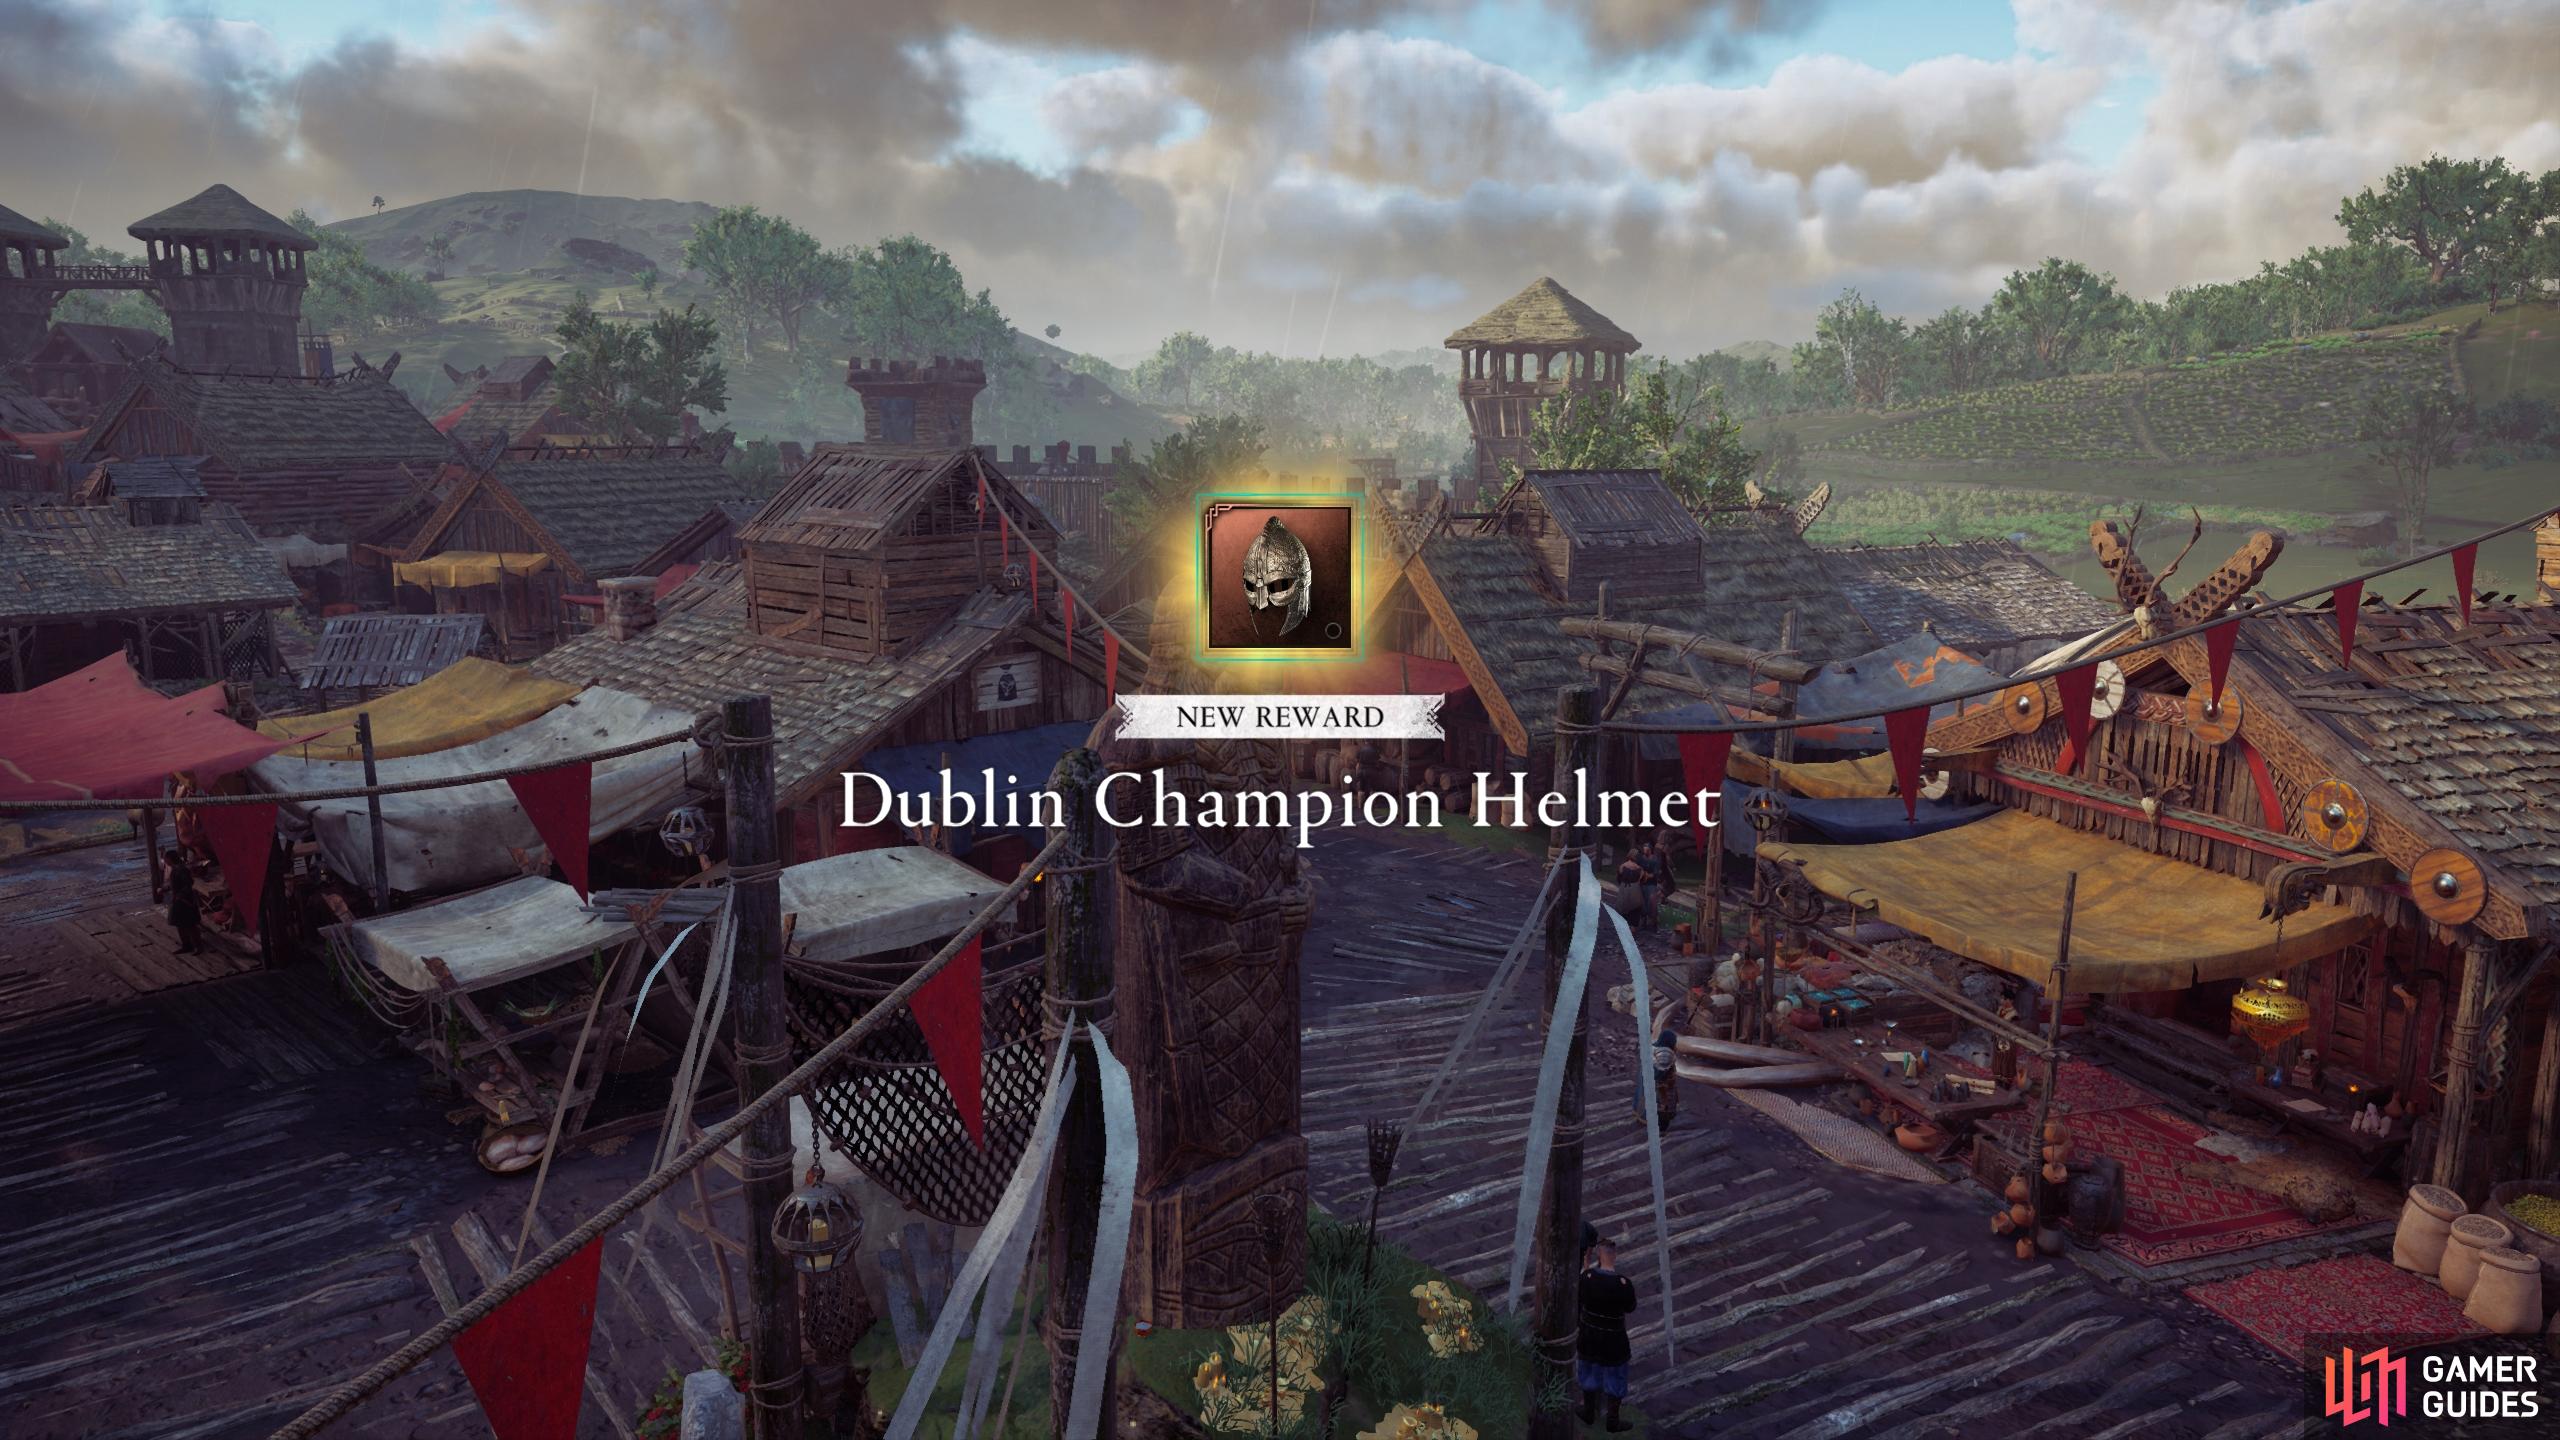 You'll be rewarded with a piece of Dublin Champion armor at renown ranks 2, 4, and 5.